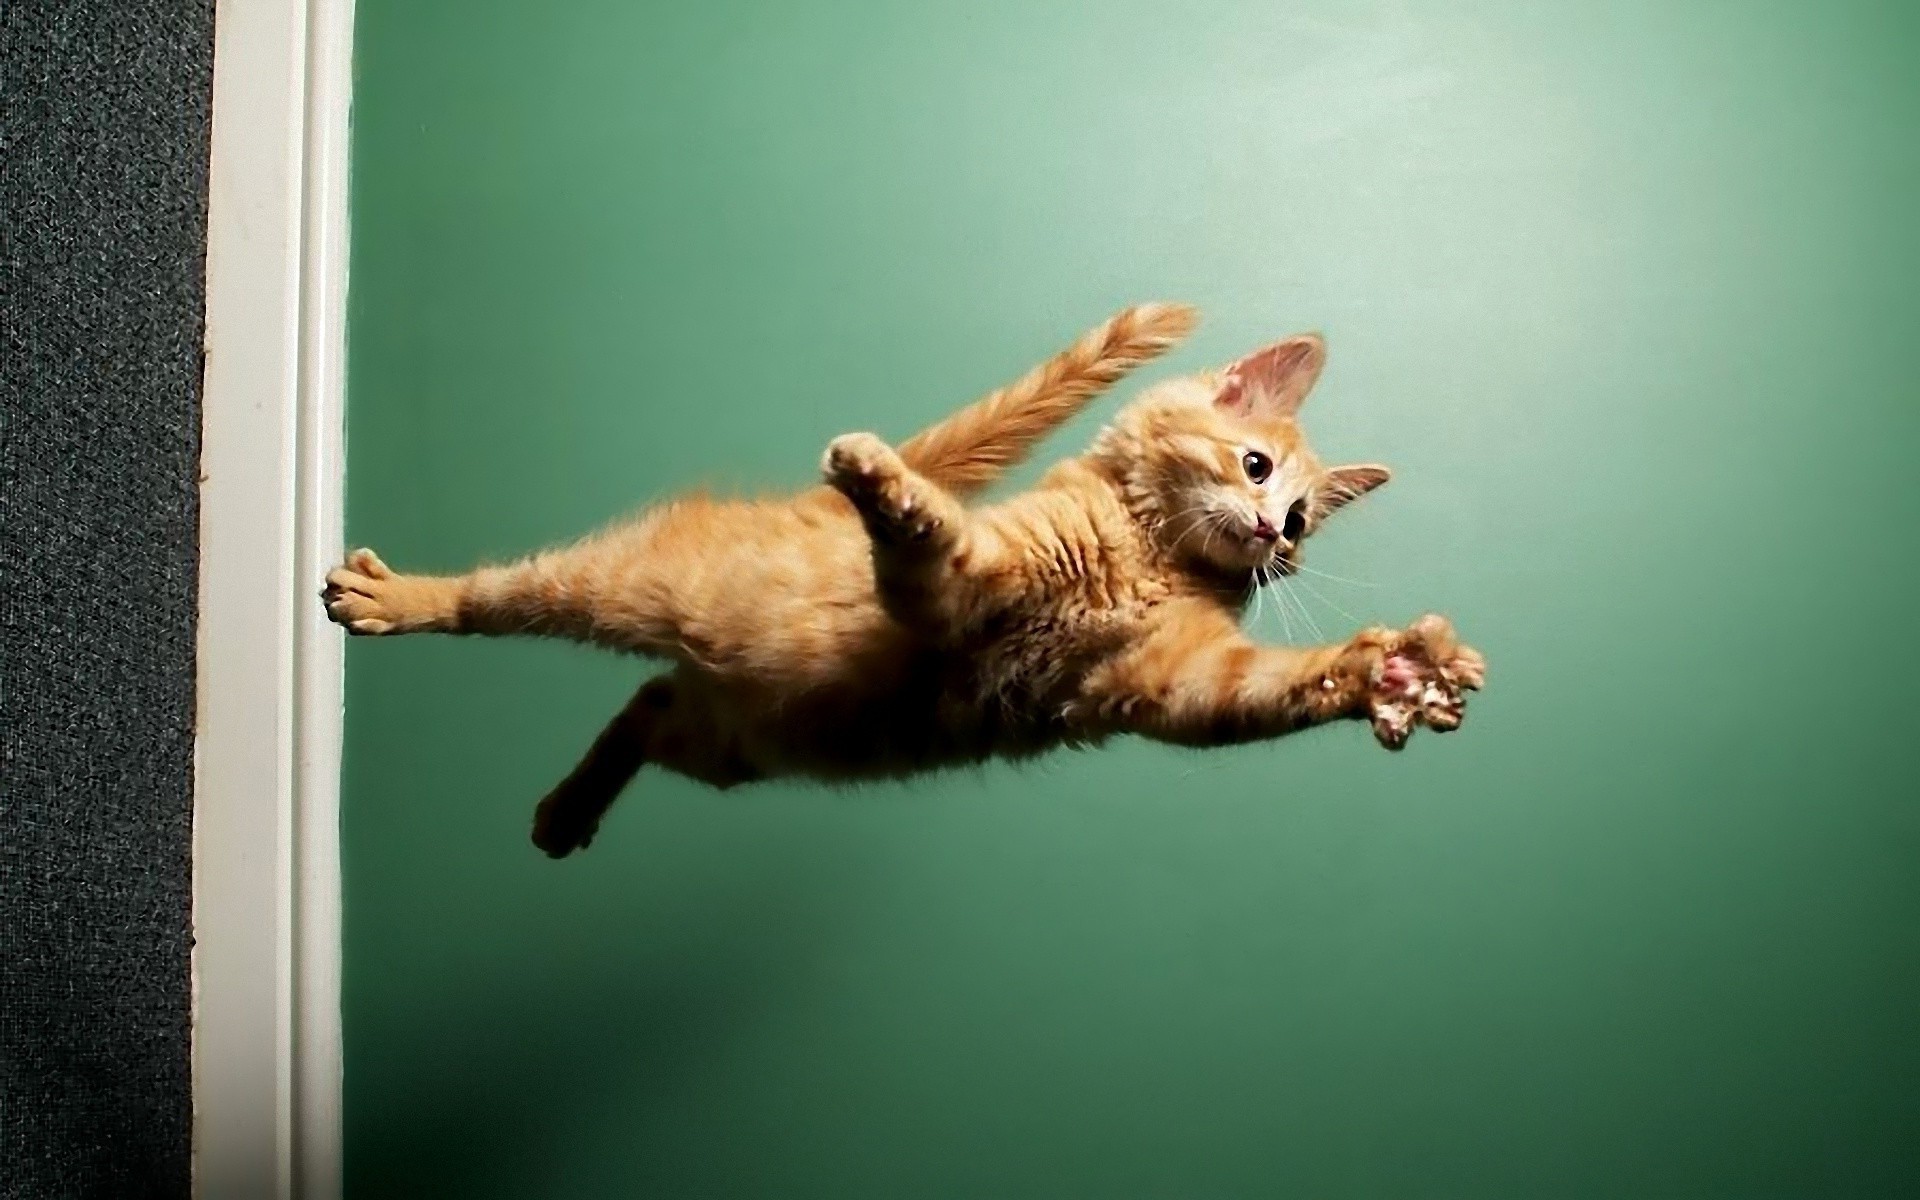 Animals___Cats___The_cat_flies_through_the_air_046686_